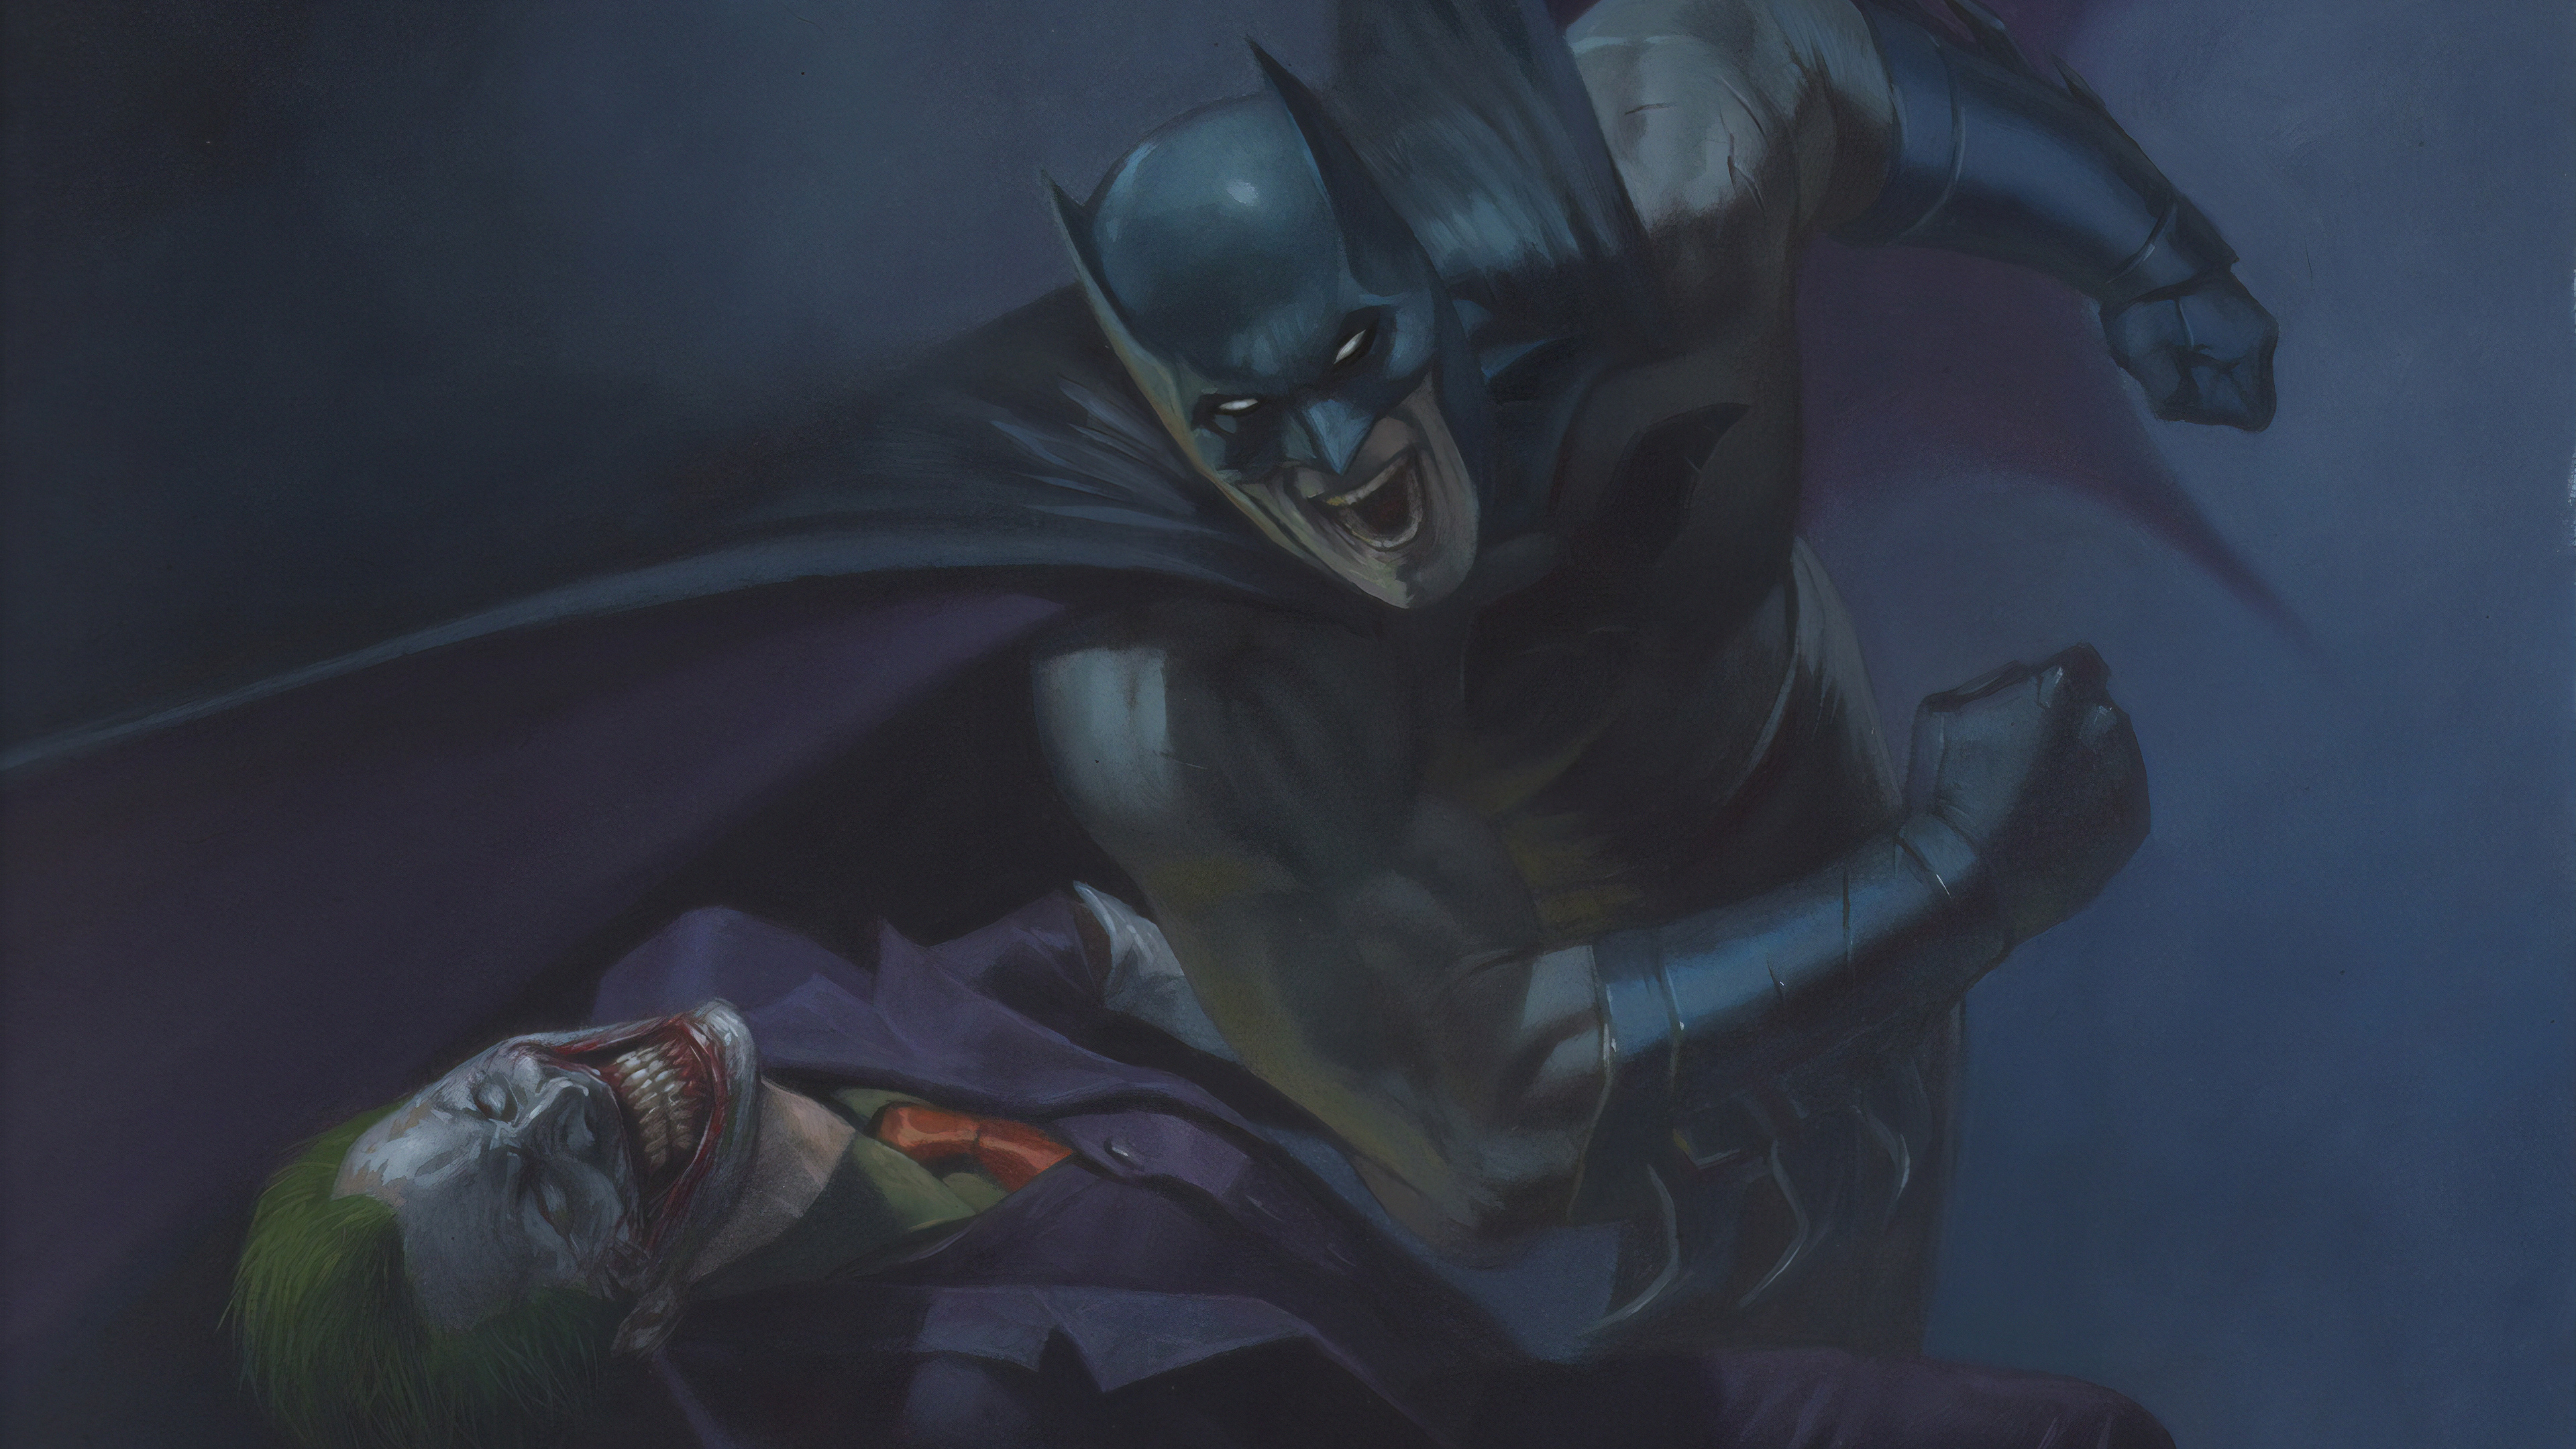 X batman vs joker new x resolution hd k wallpapers images backgrounds photos and pictures